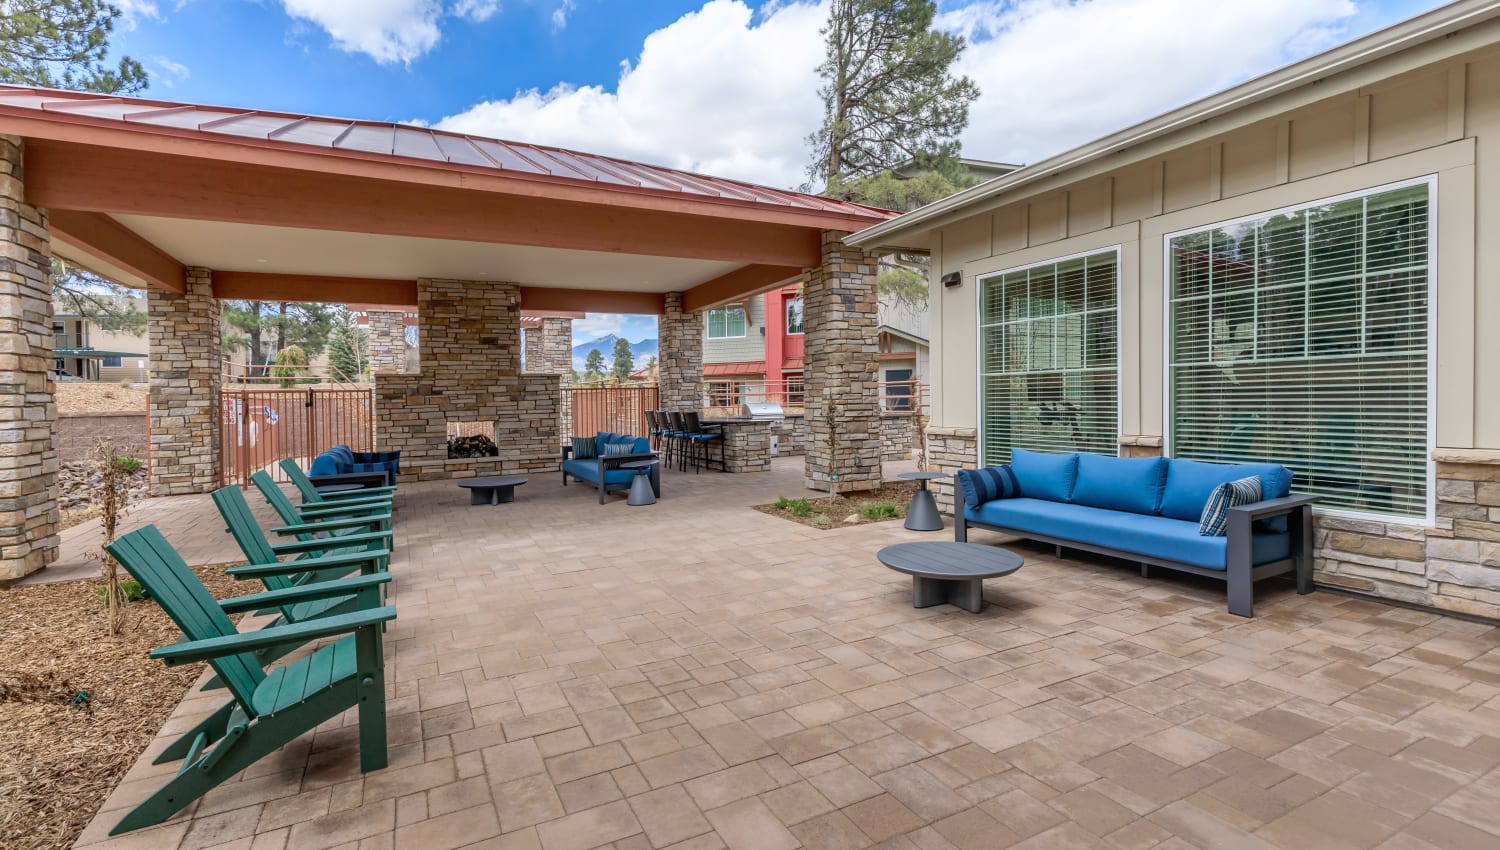 Patio seating at Trailside Apartments in Flagstaff, Arizona